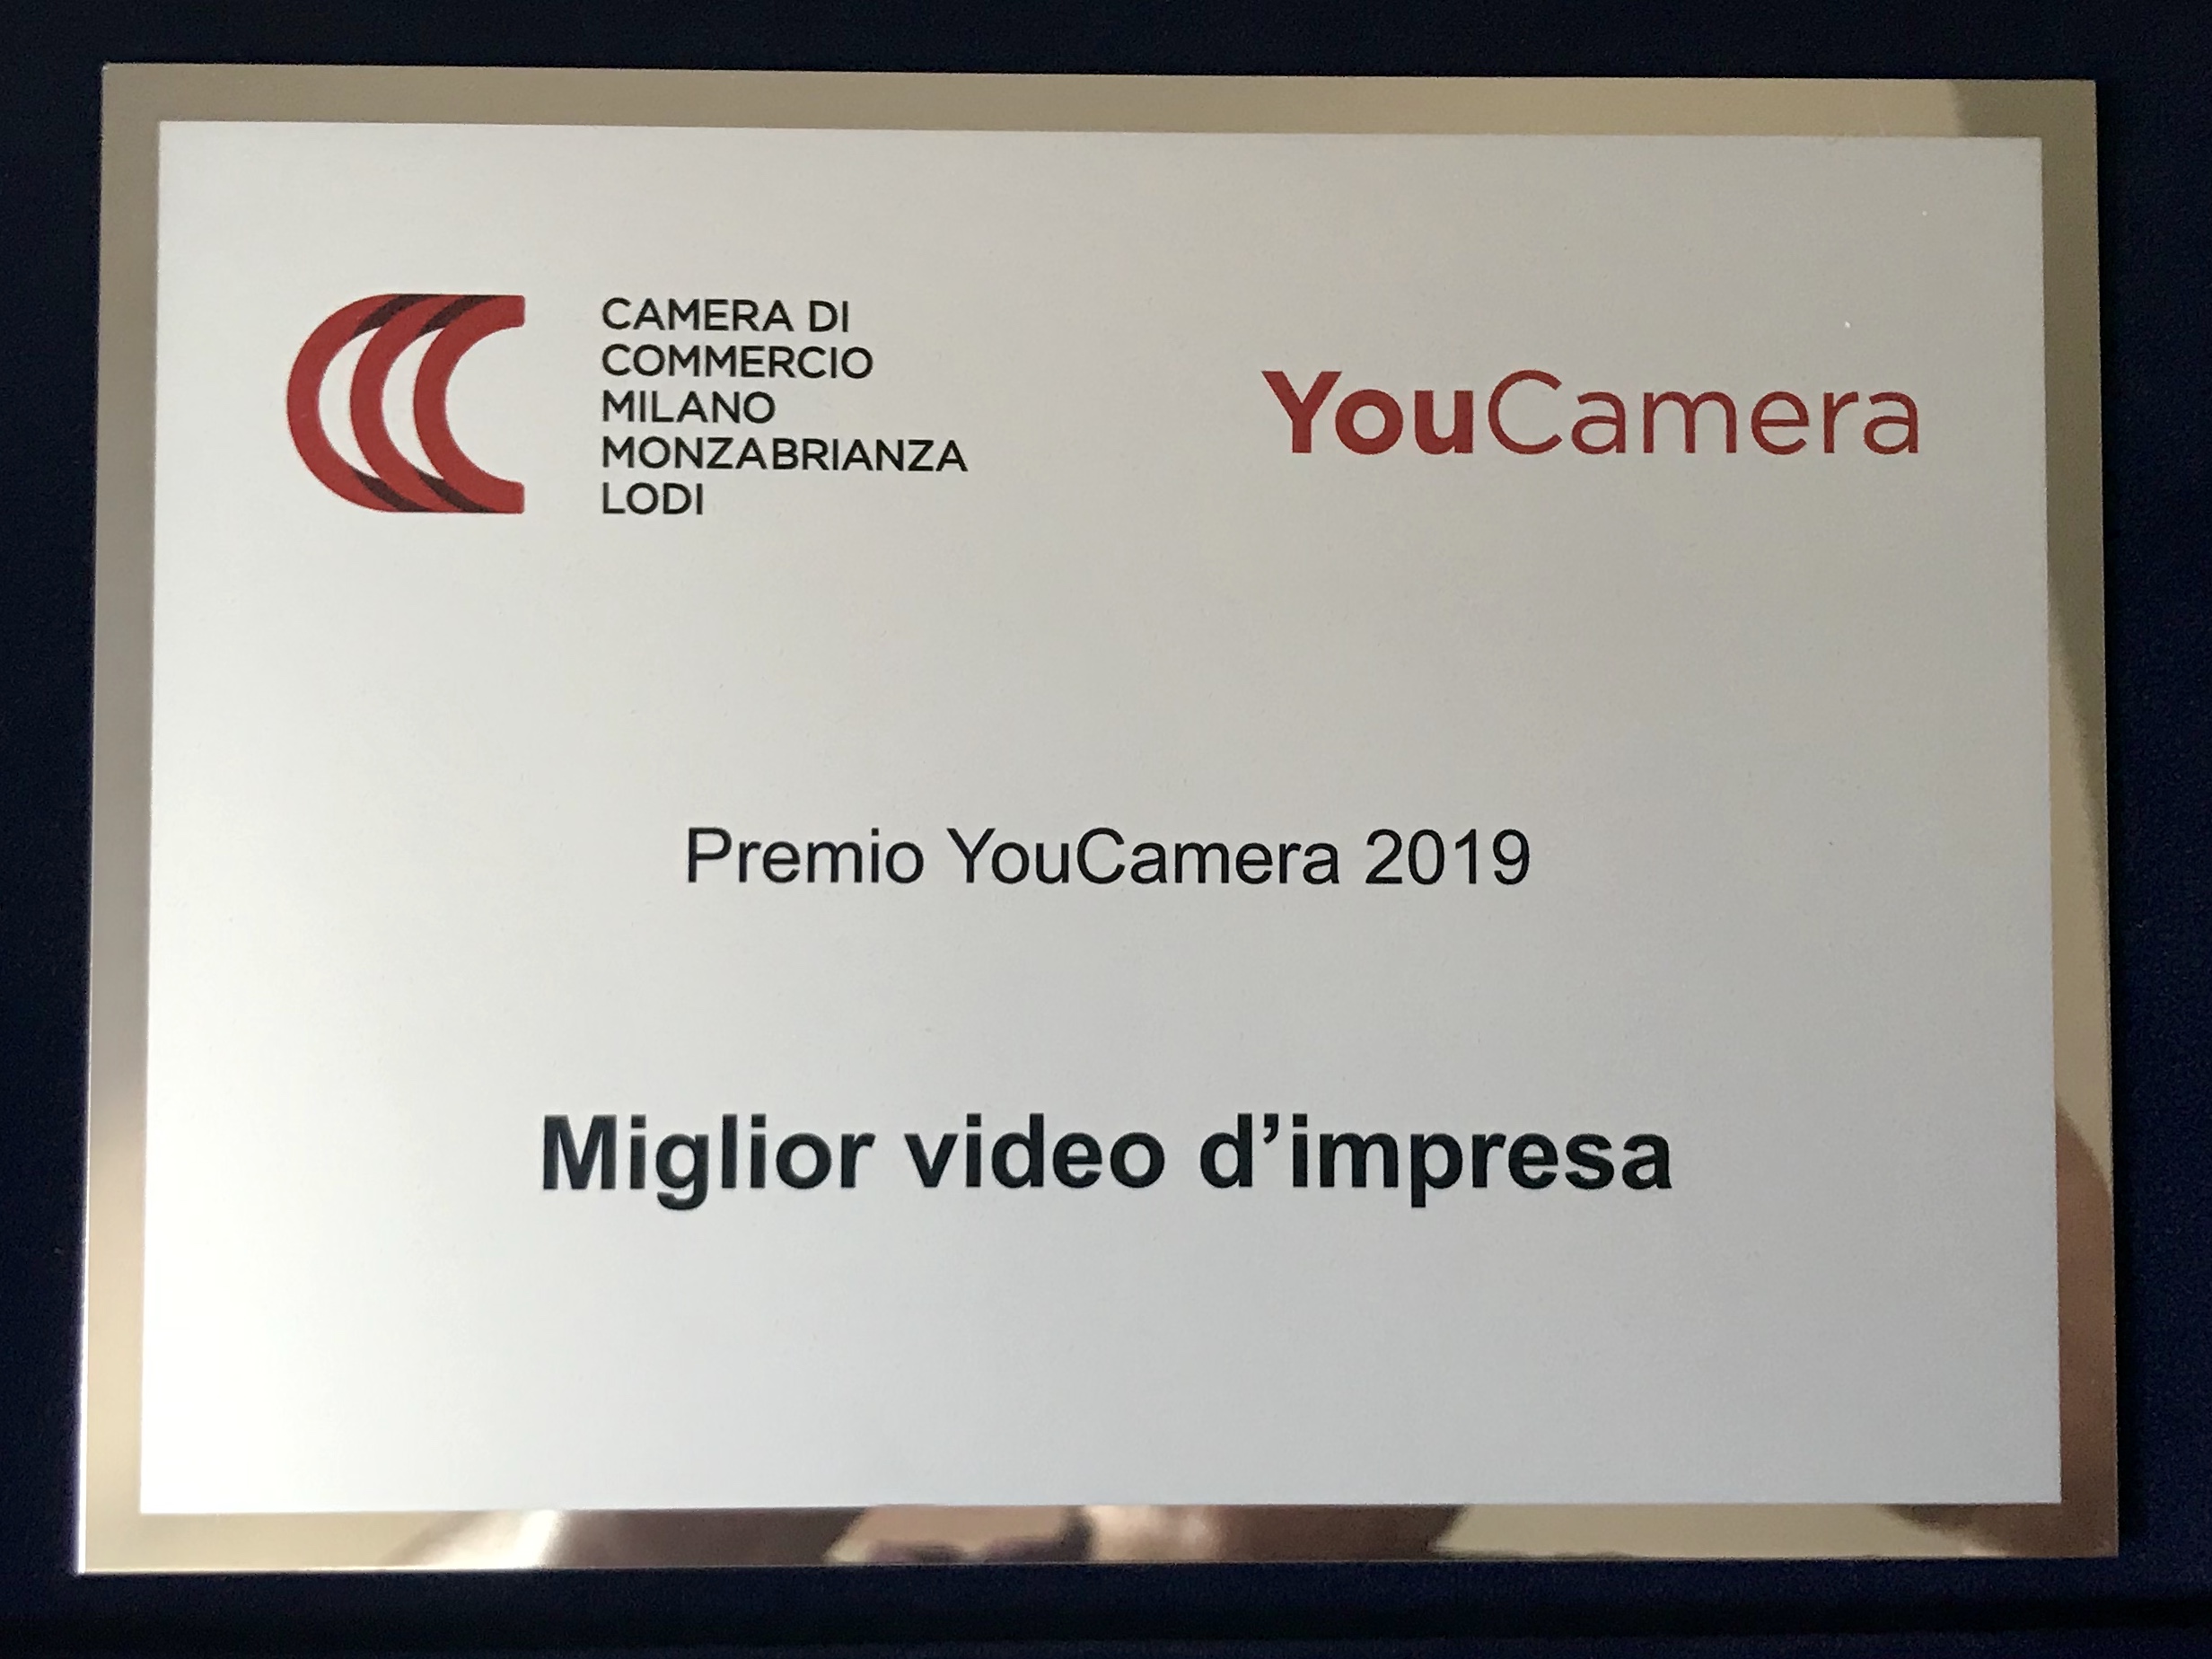 KnowAndBe.live receives the 2019 "YouCamera" award for the best corporate video - Knowandbe.live